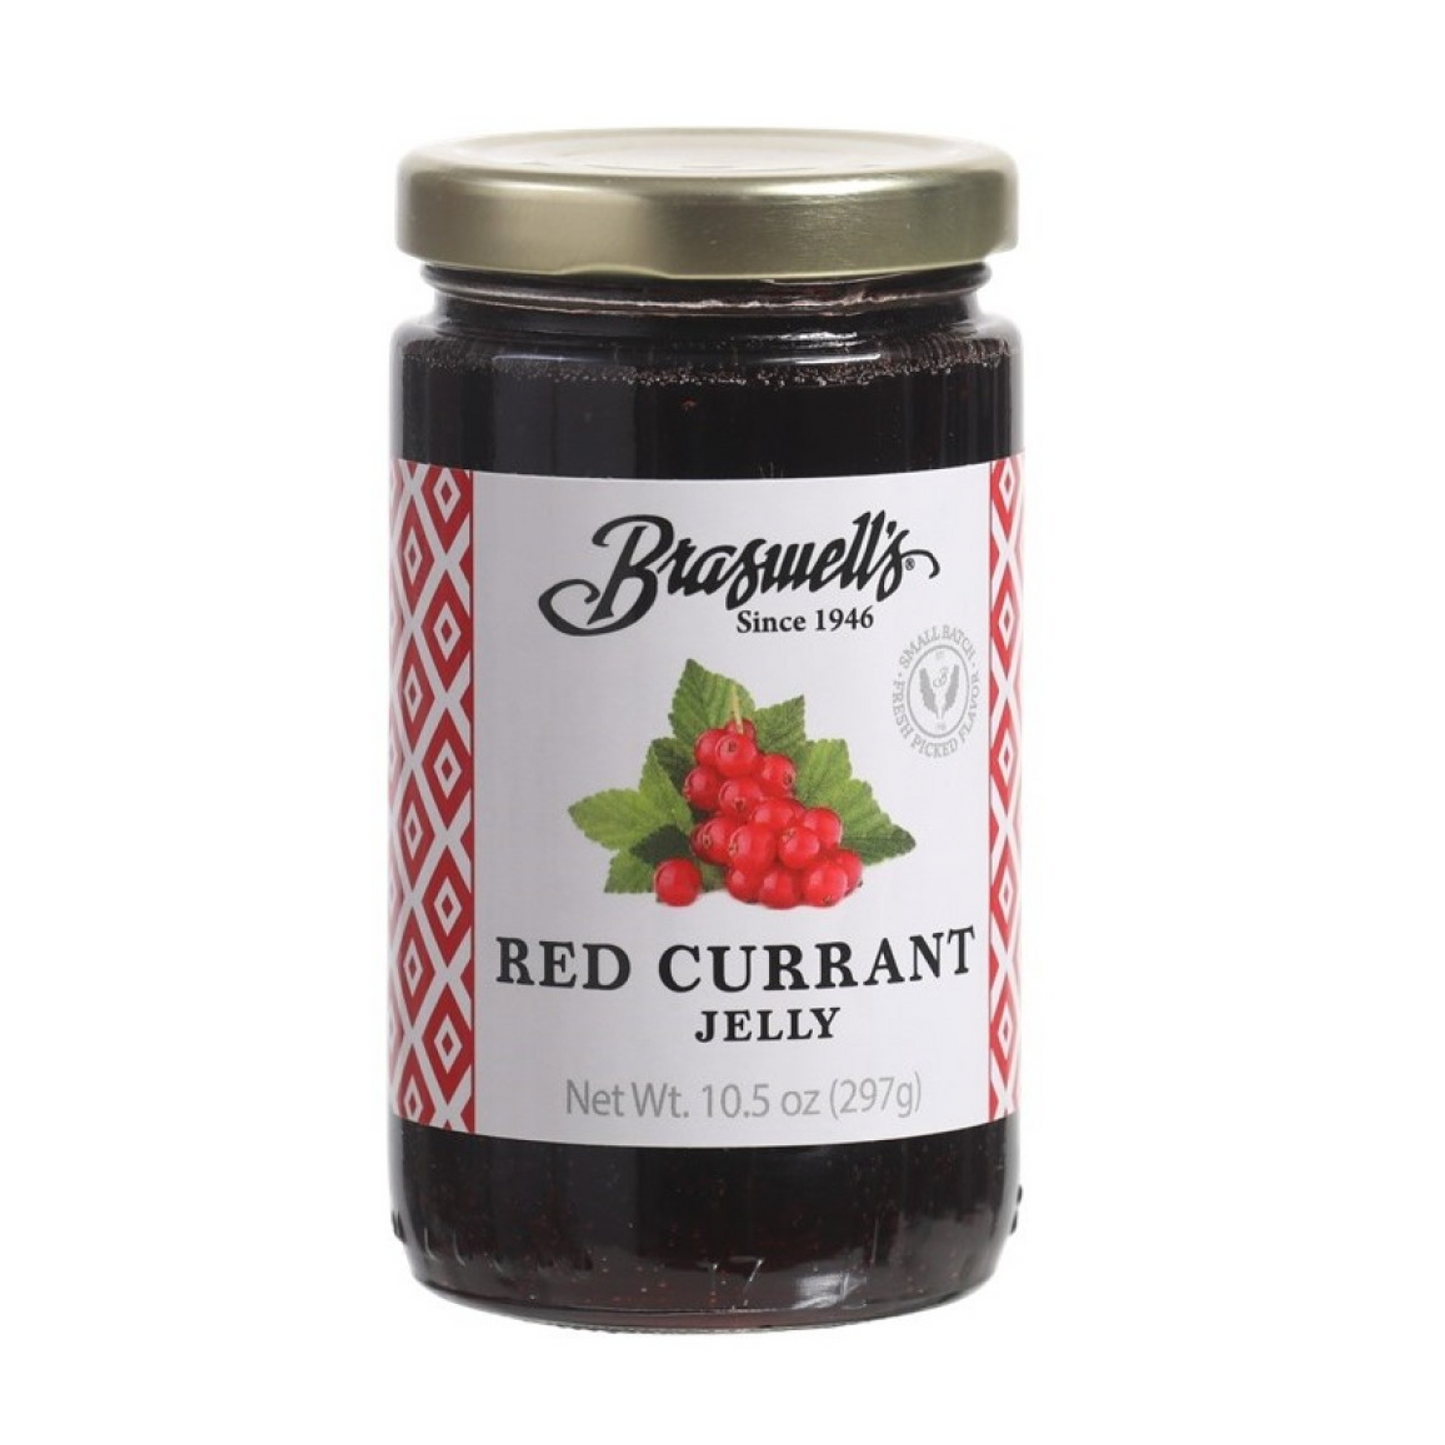 Braswell's Red Currant Jelly